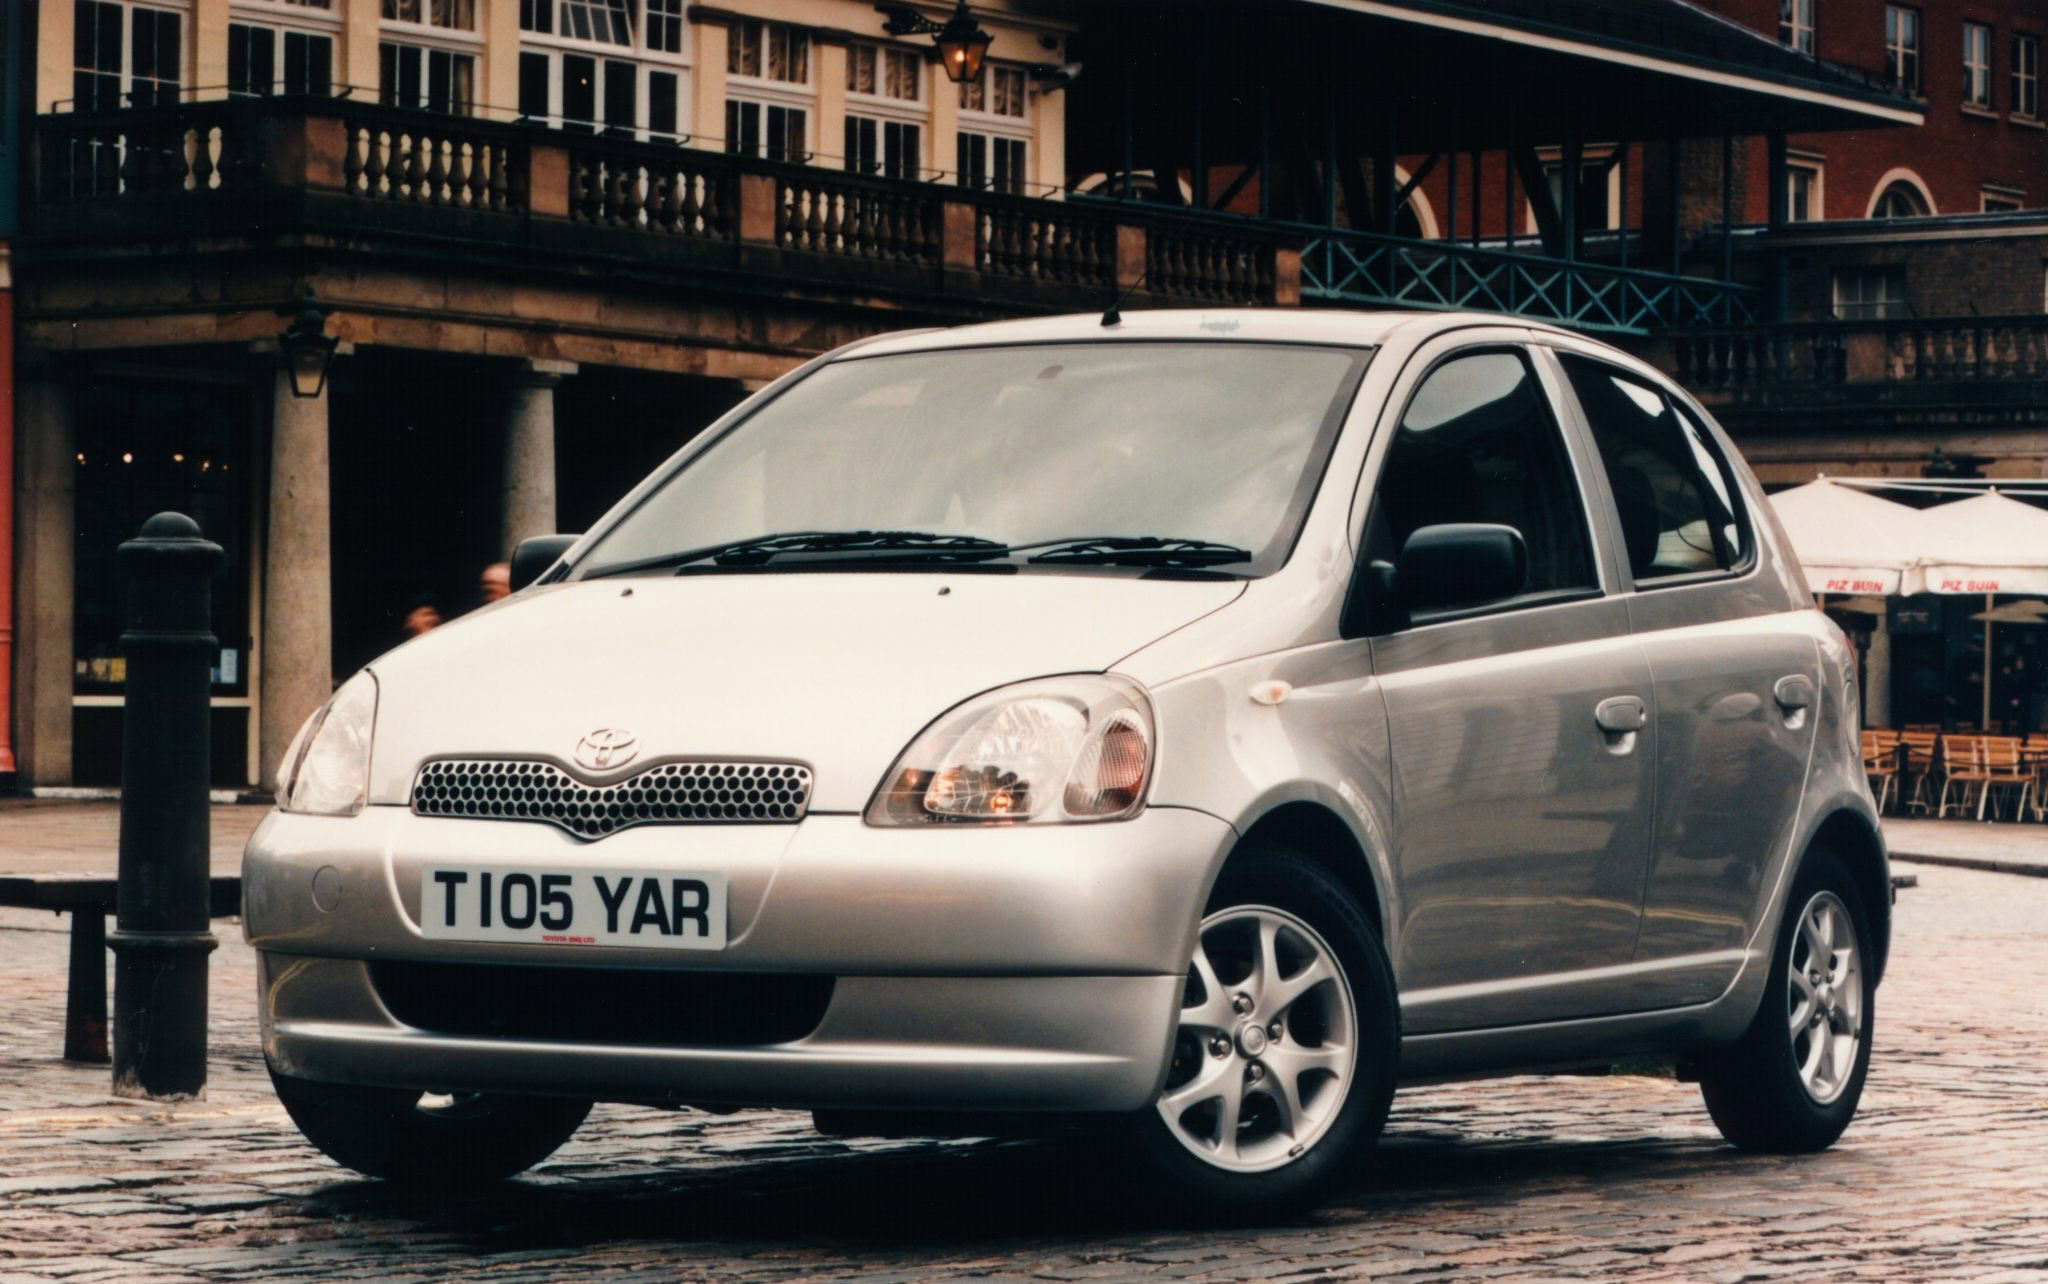 1999 Toyota Yaris - Picture 14 of 24 - #76742 2048x1284